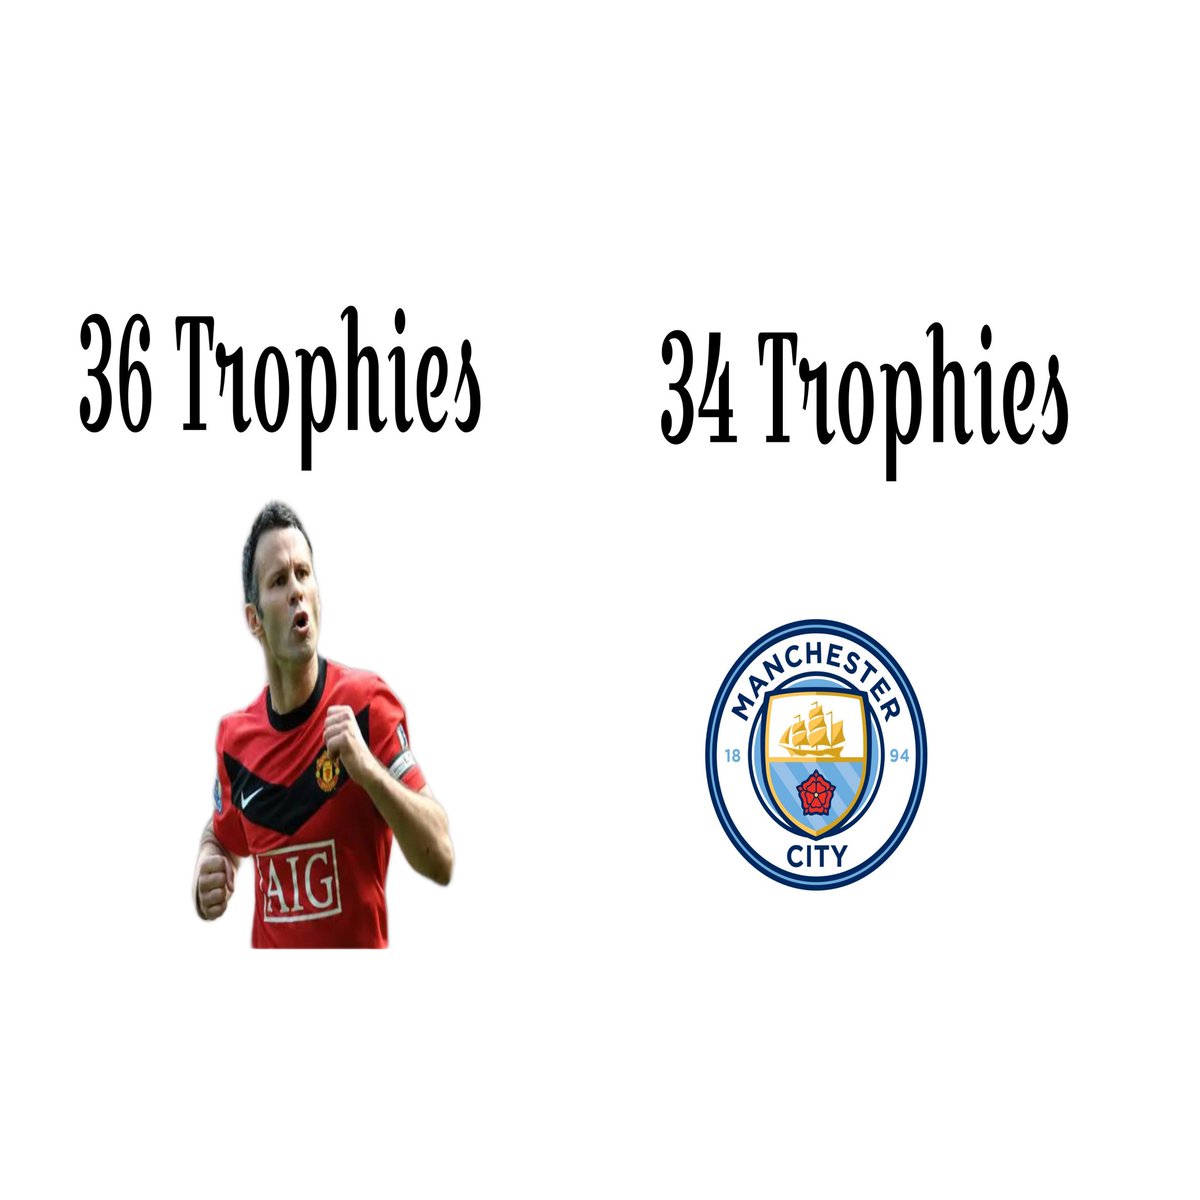 Wanted you to know Ryan Giggs is bigger than Manchester City Football Club 😭